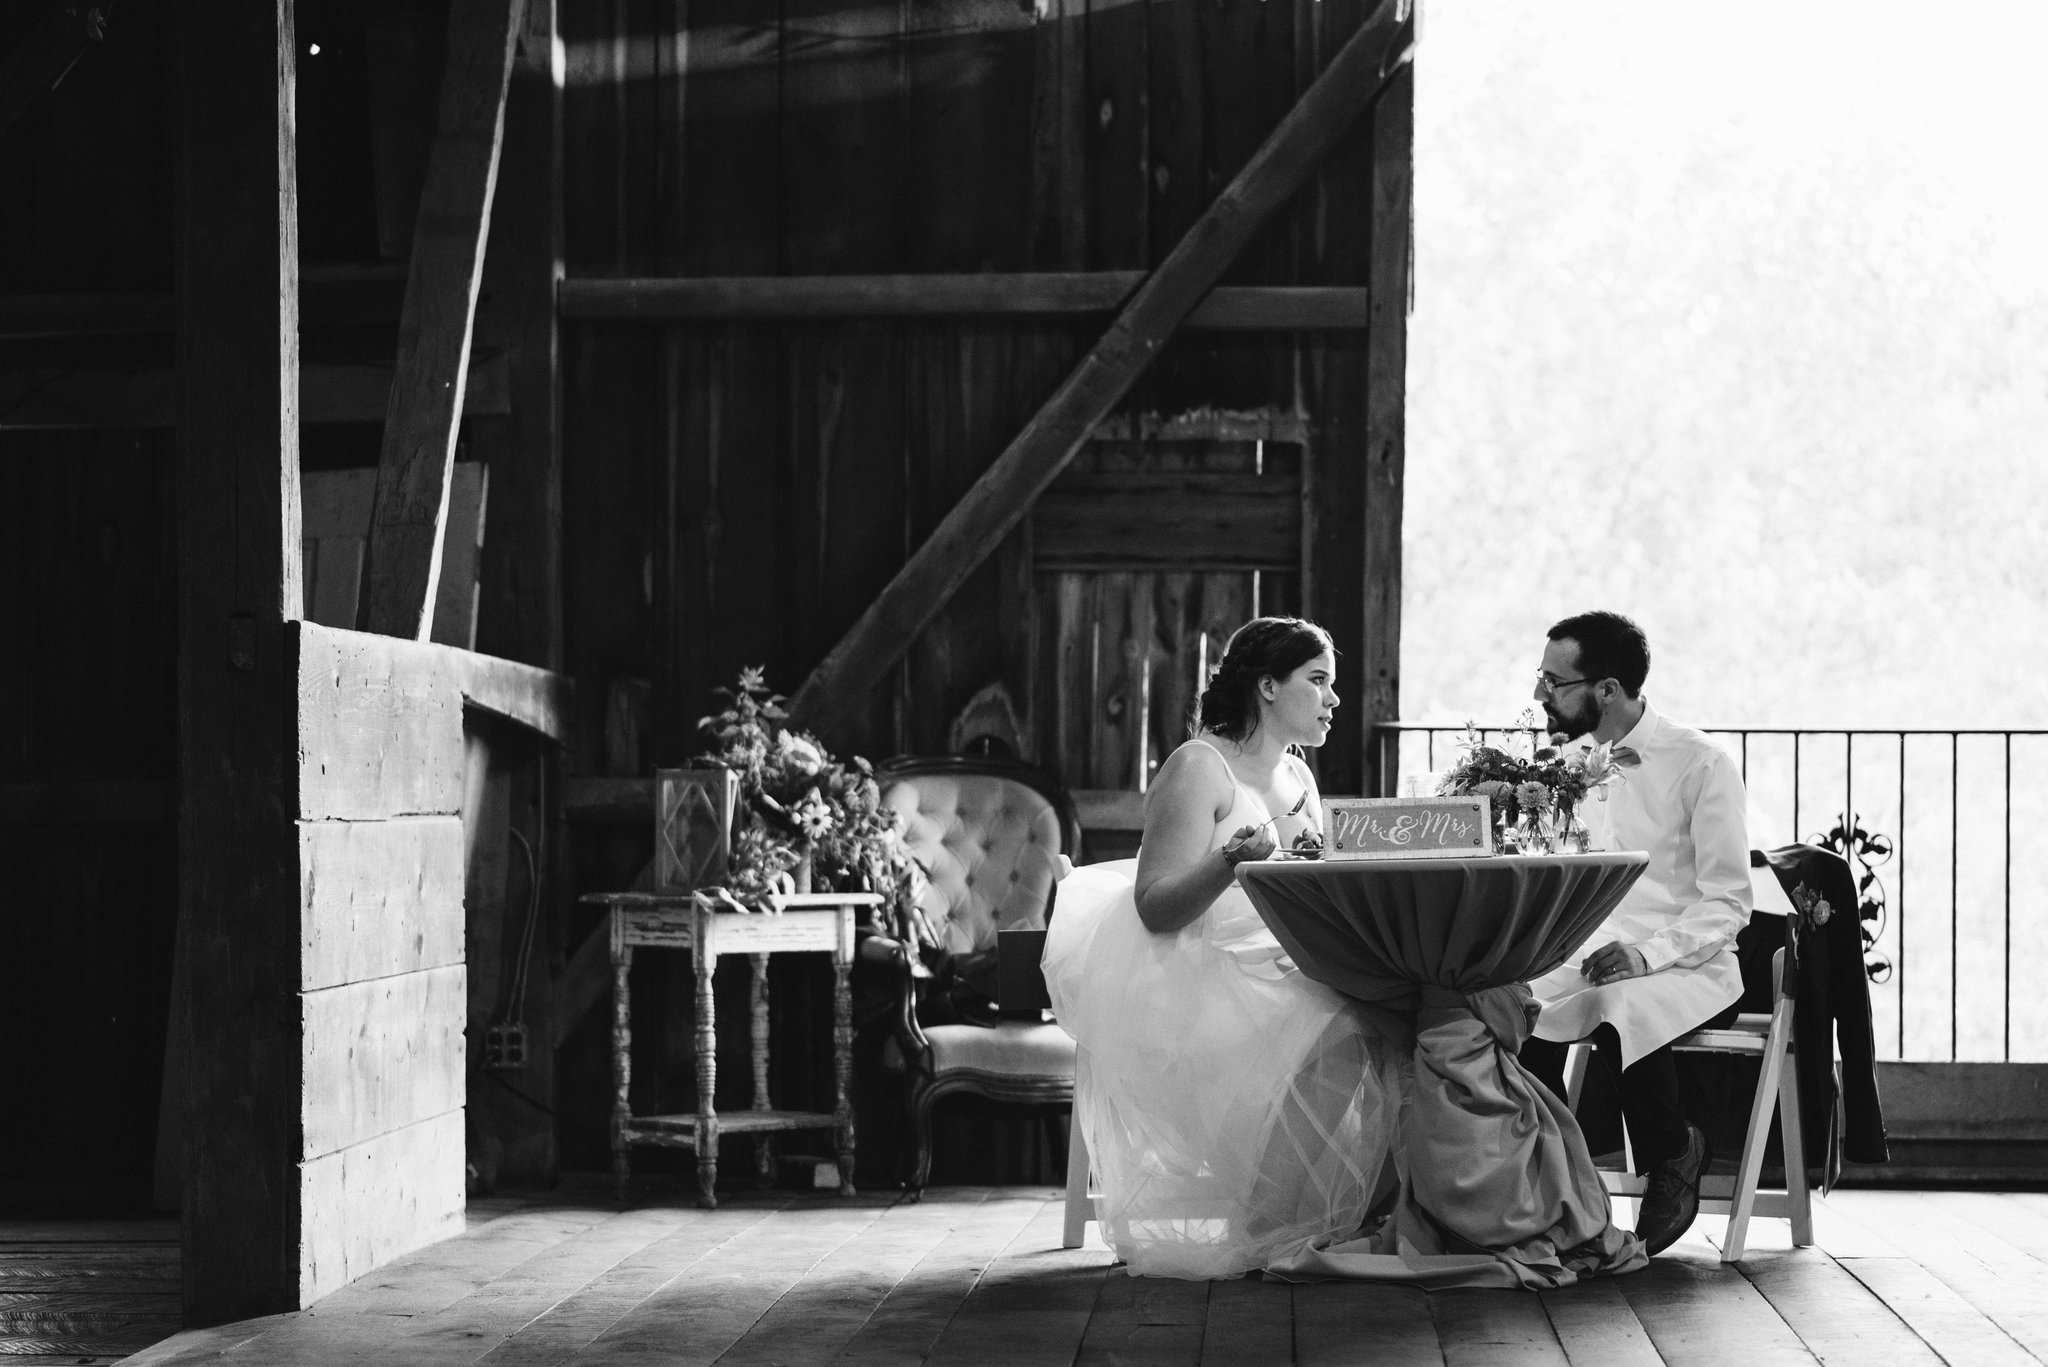 Rocklands Farm, Maryland, Intimate Wedding, Baltimore Wedding Photographer, Sungold Flower Co, Rustic, Romantic, Barn Wedding, Bride and Groom at Head Table, Black and White Photo